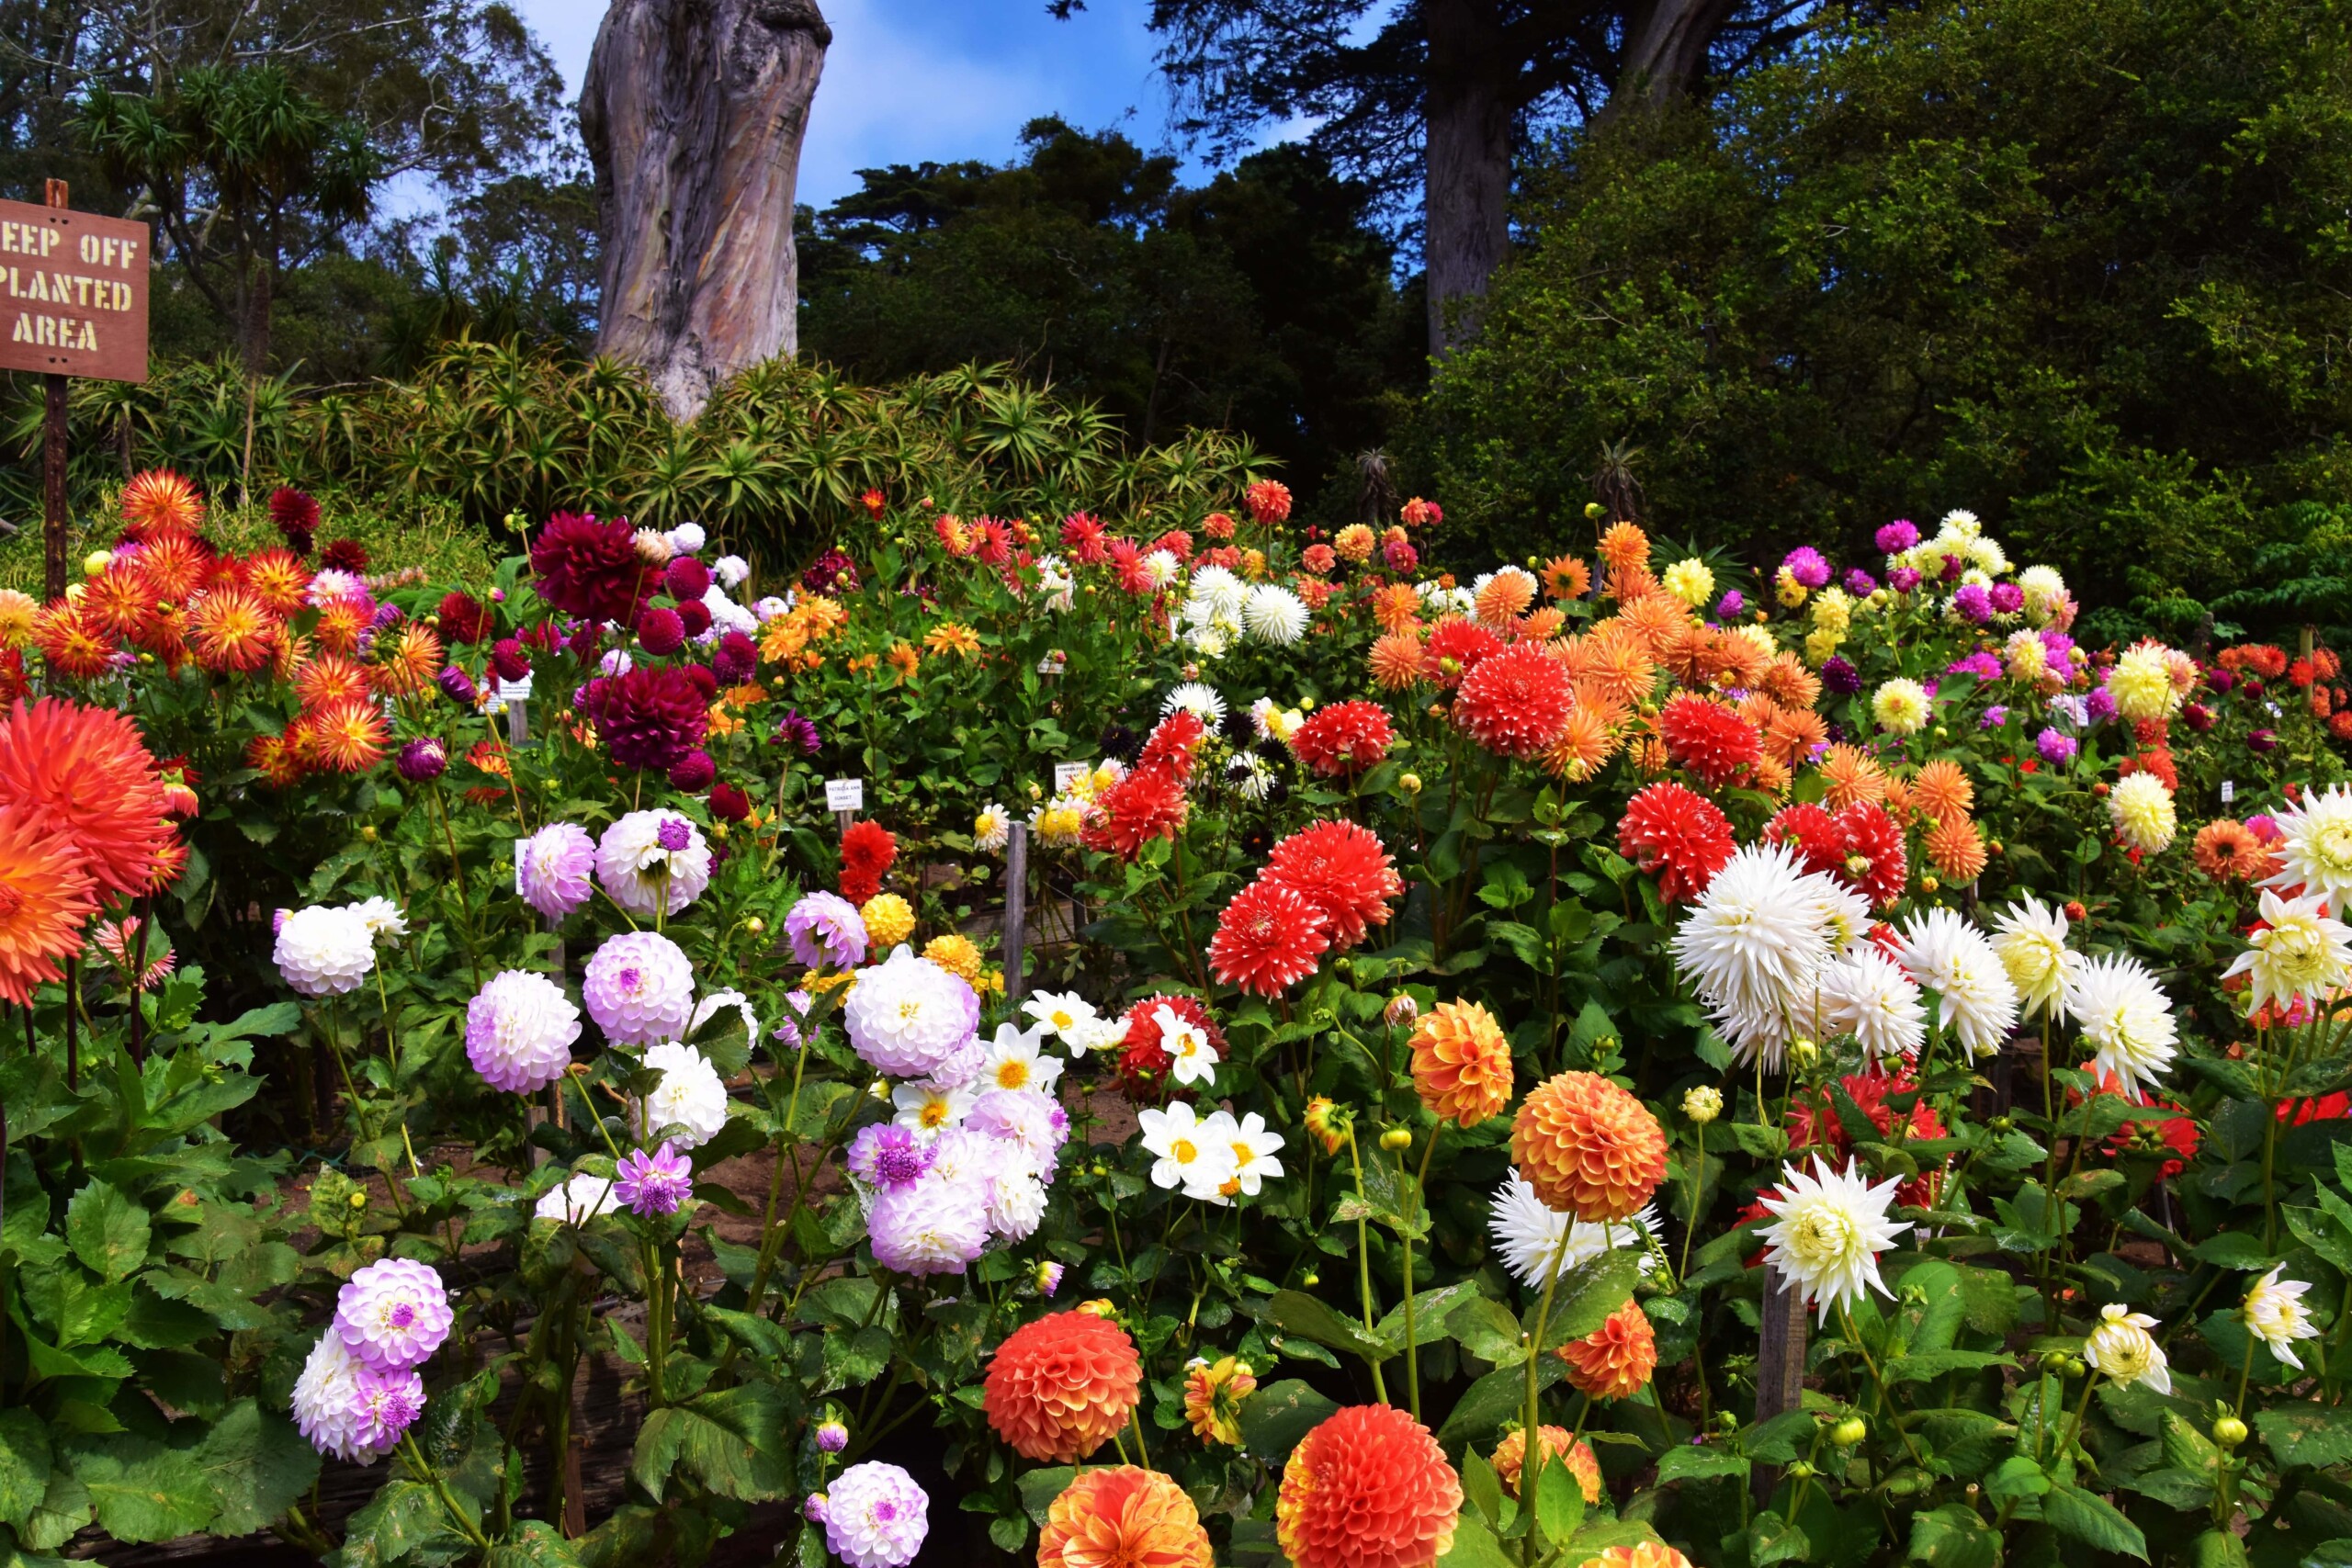 Colorful flowers in bloom in the Golden Gate Park in San Francisco